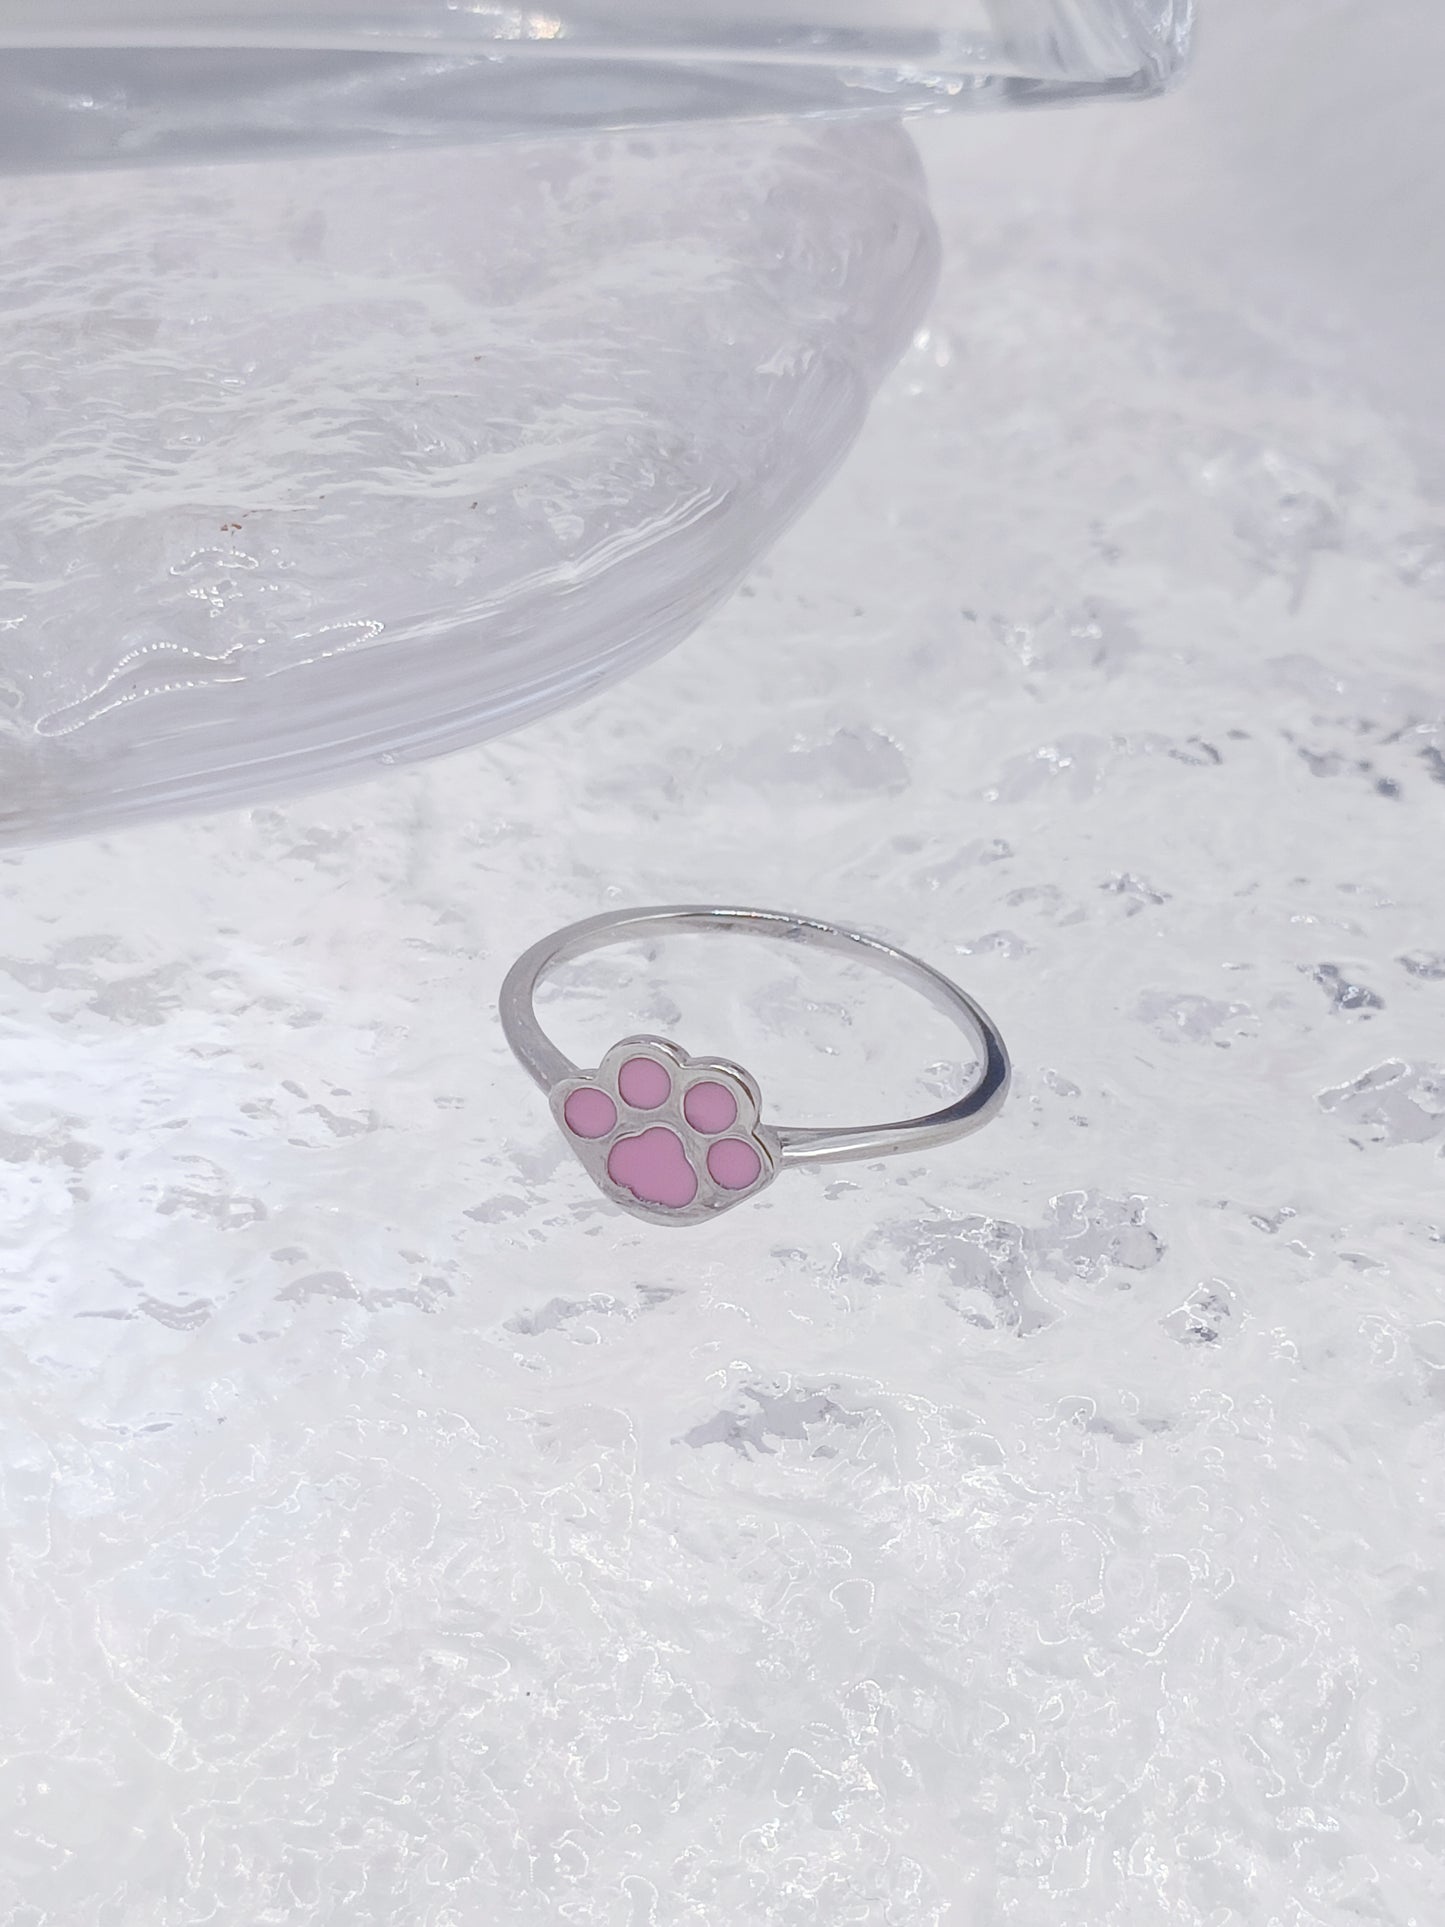 【Luxcellent x CreaMint】LAFS (Love at First Sight) Ring